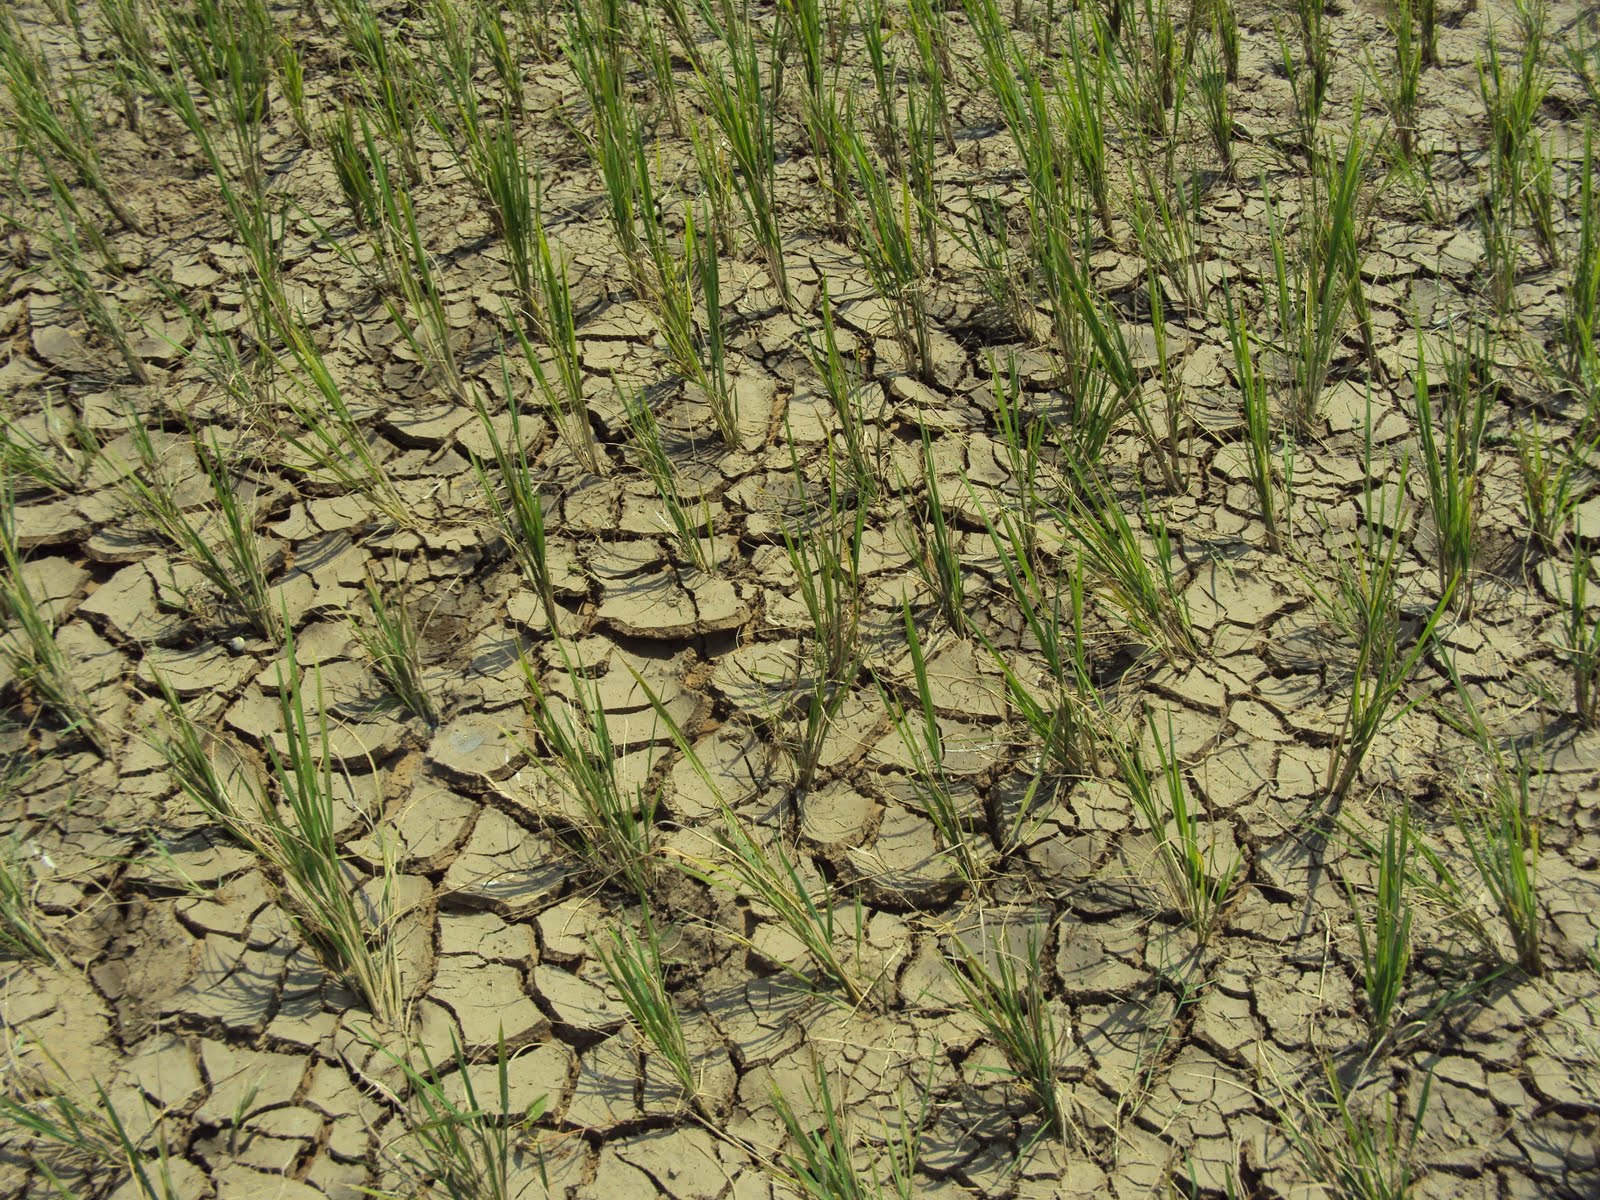 Dry Crops